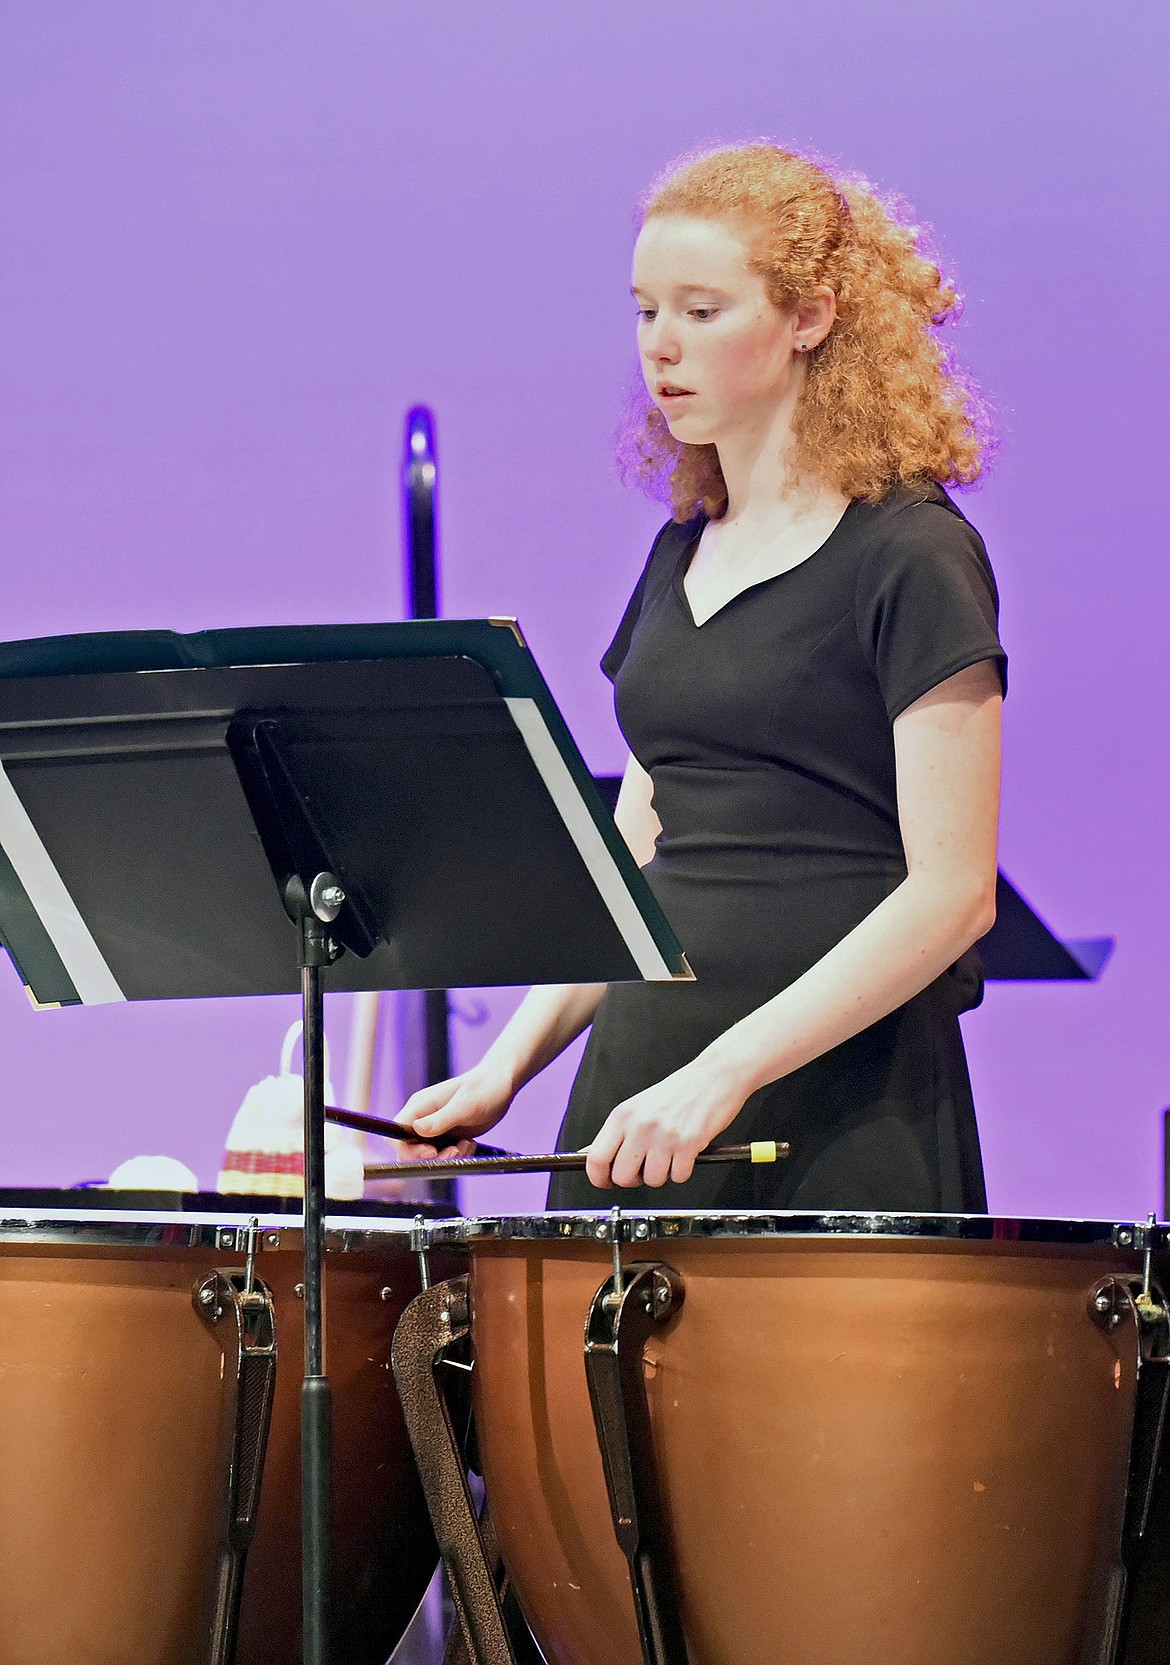 Whitefish High School student Rachel Bowland plays the timpani during the Fall Band Concert on Oct. 28 at the Performing Arts Center in Whitefish. (Whitney England/Whitefish Pilot)